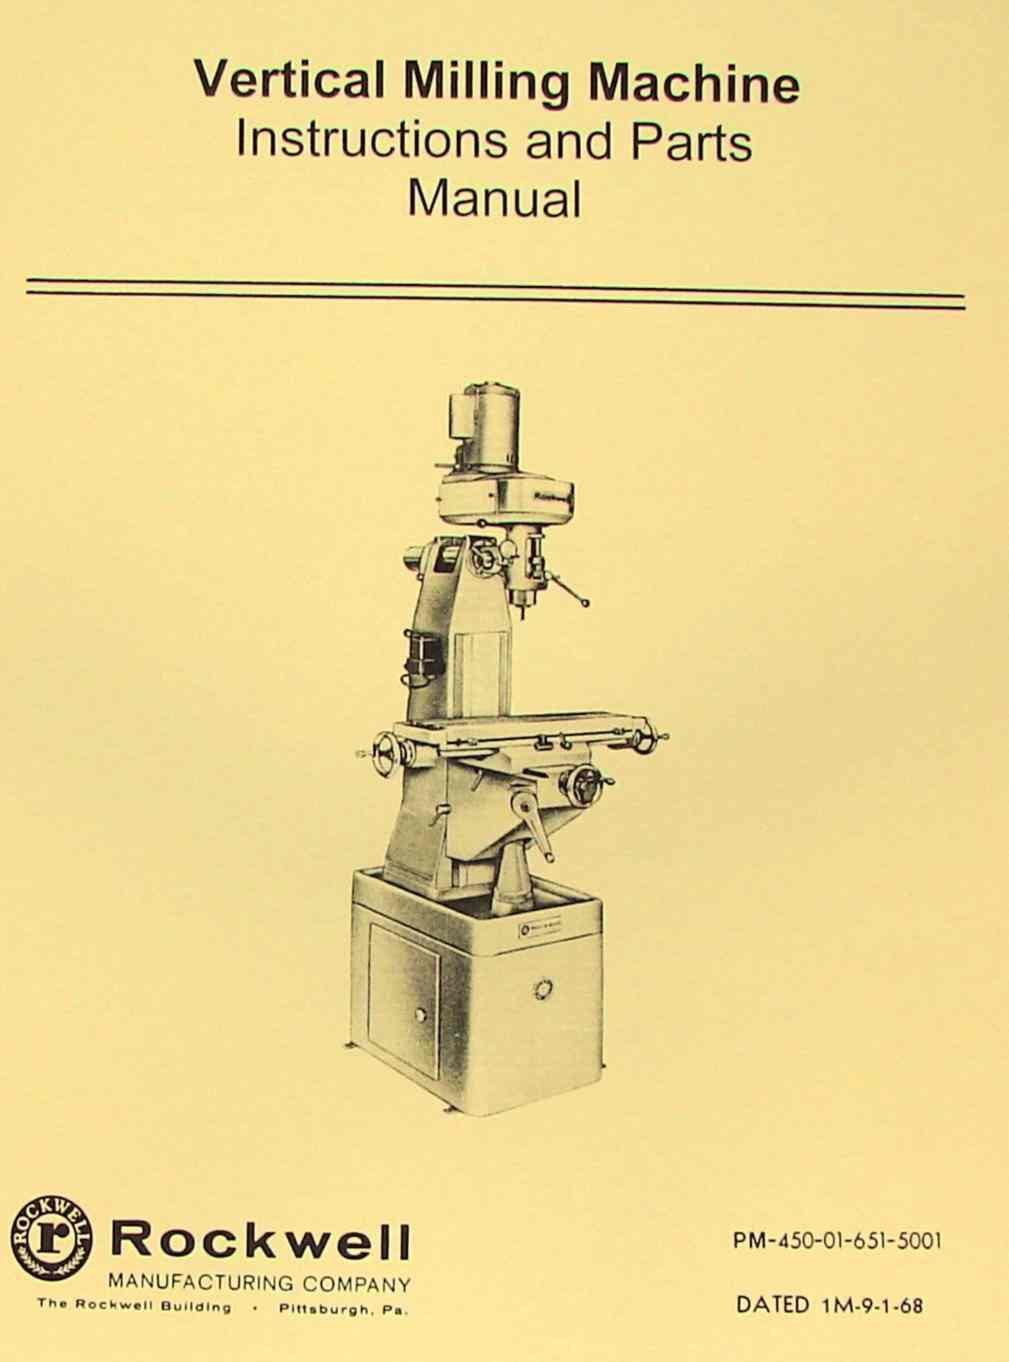 Tool & Cutter Grinder Covel Clausing 12 Operations and Assembly Manual 1968 